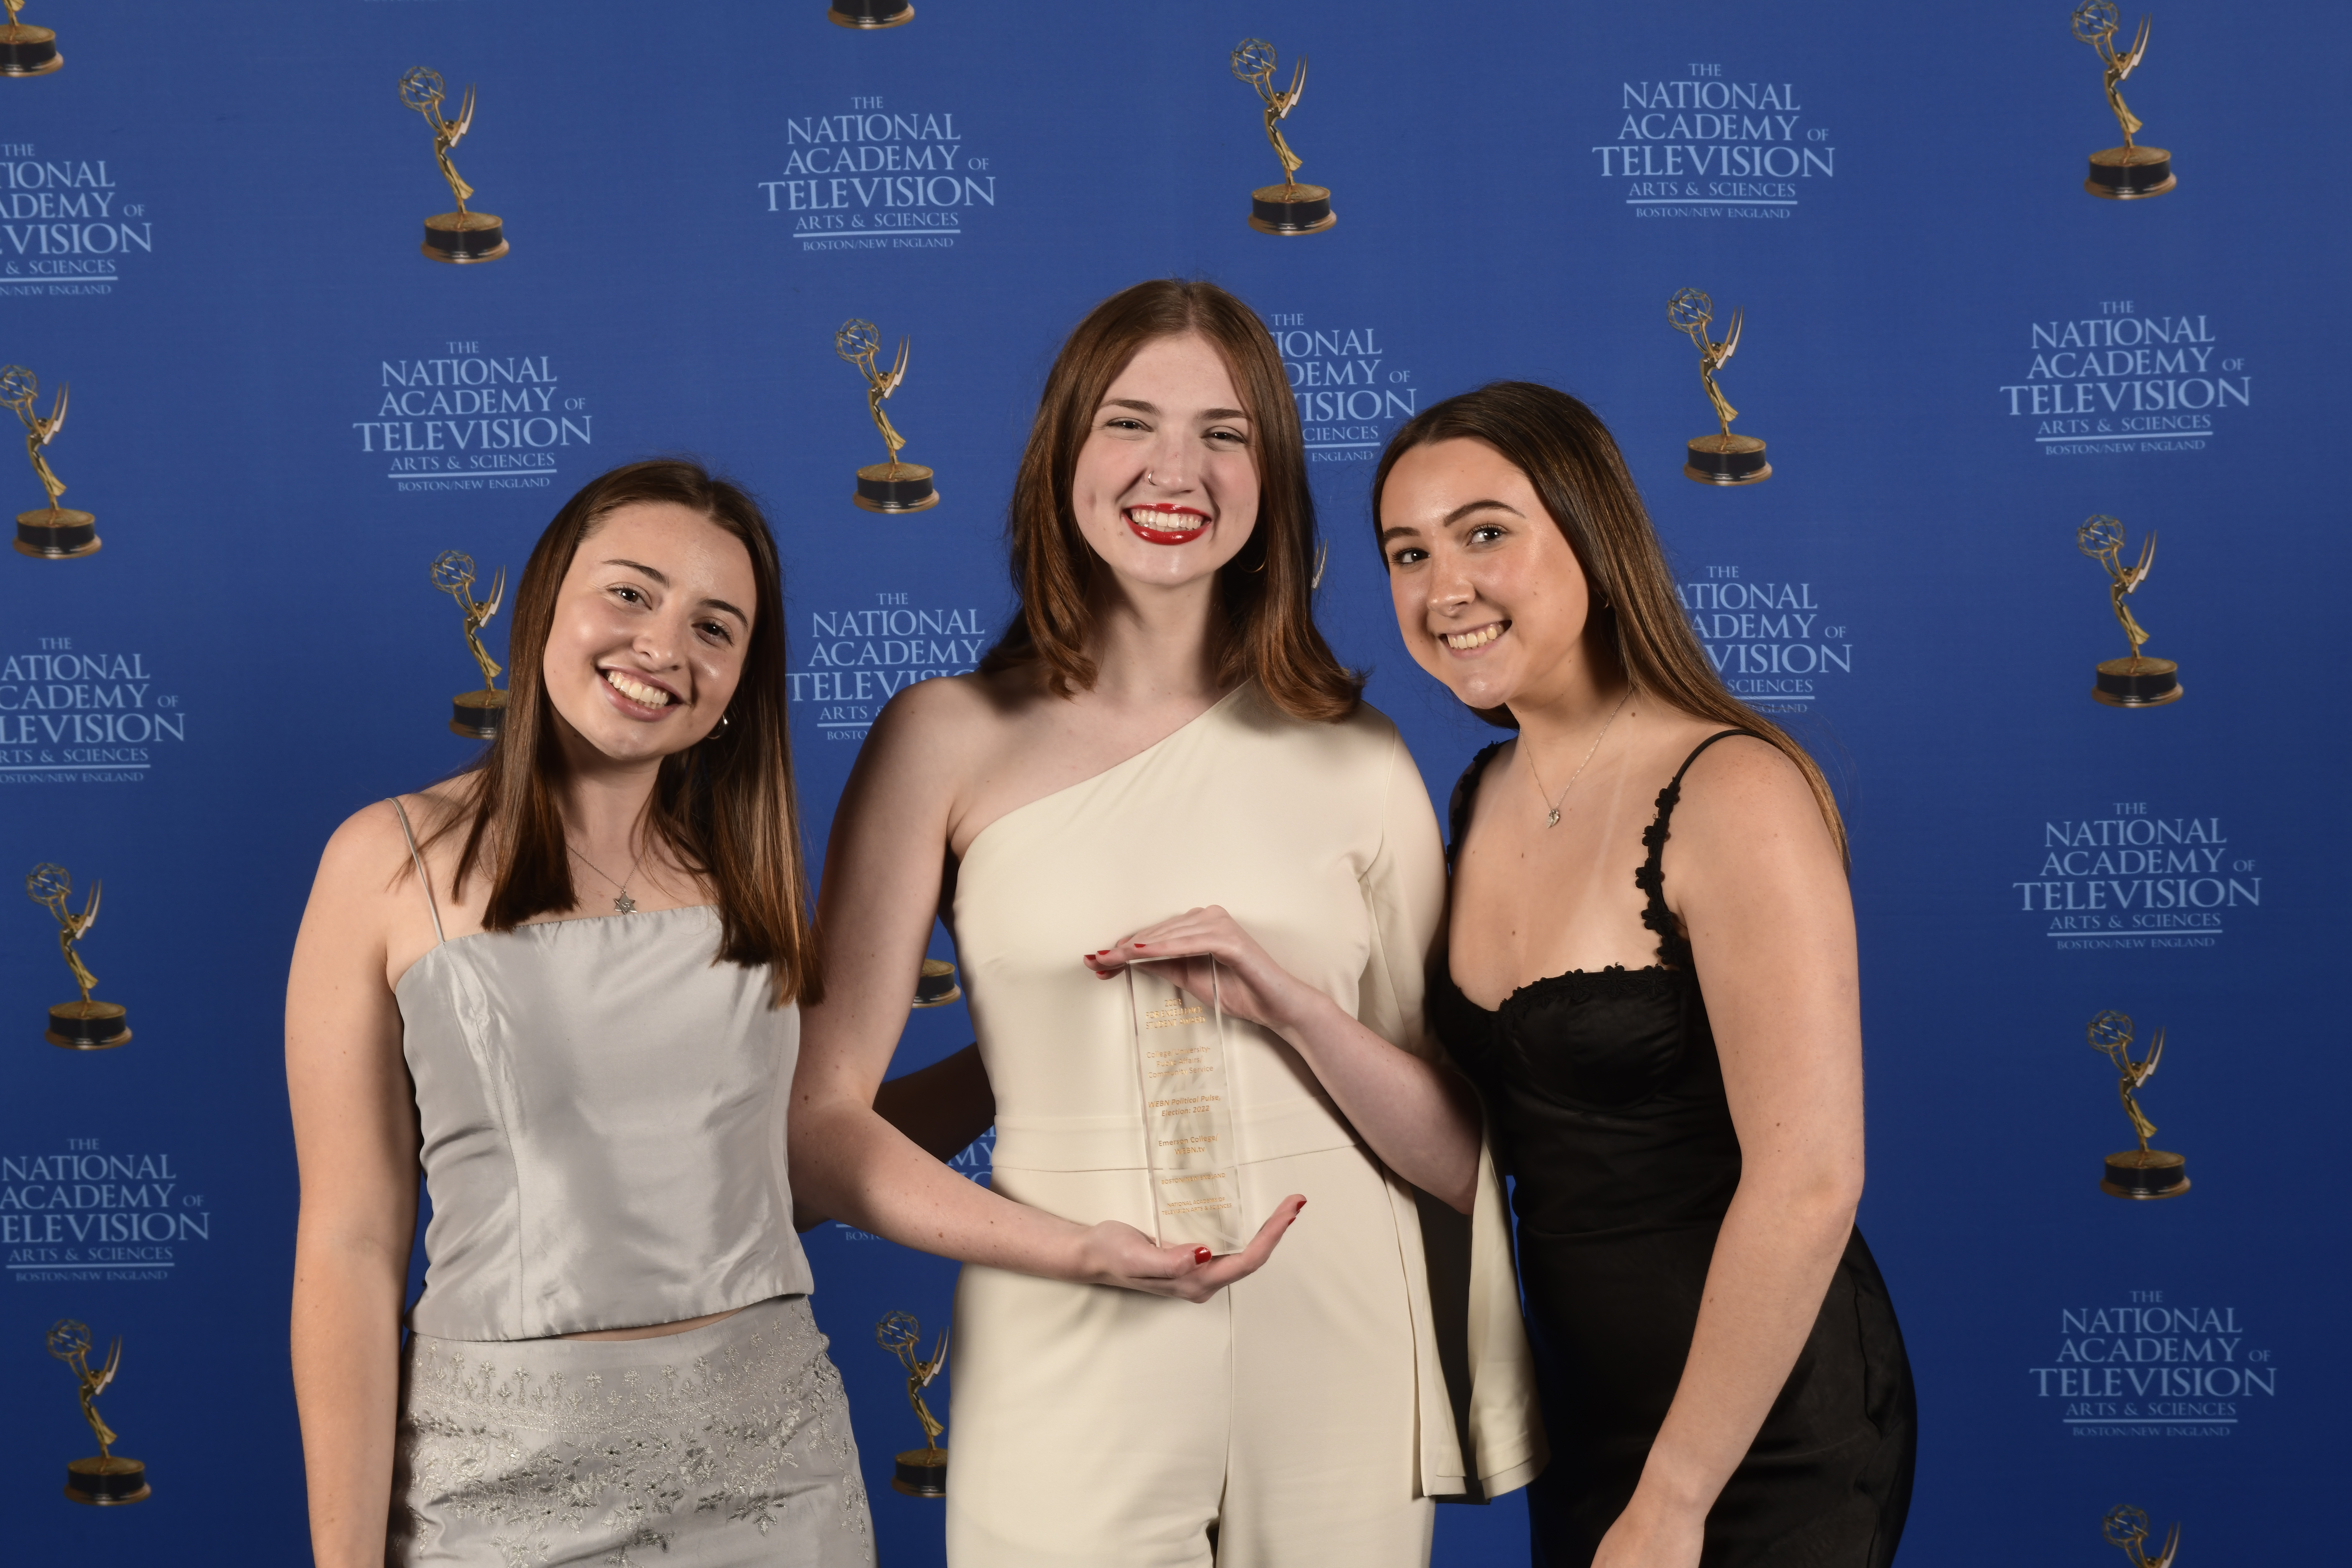 Three women stand together with one in the middle holding an award